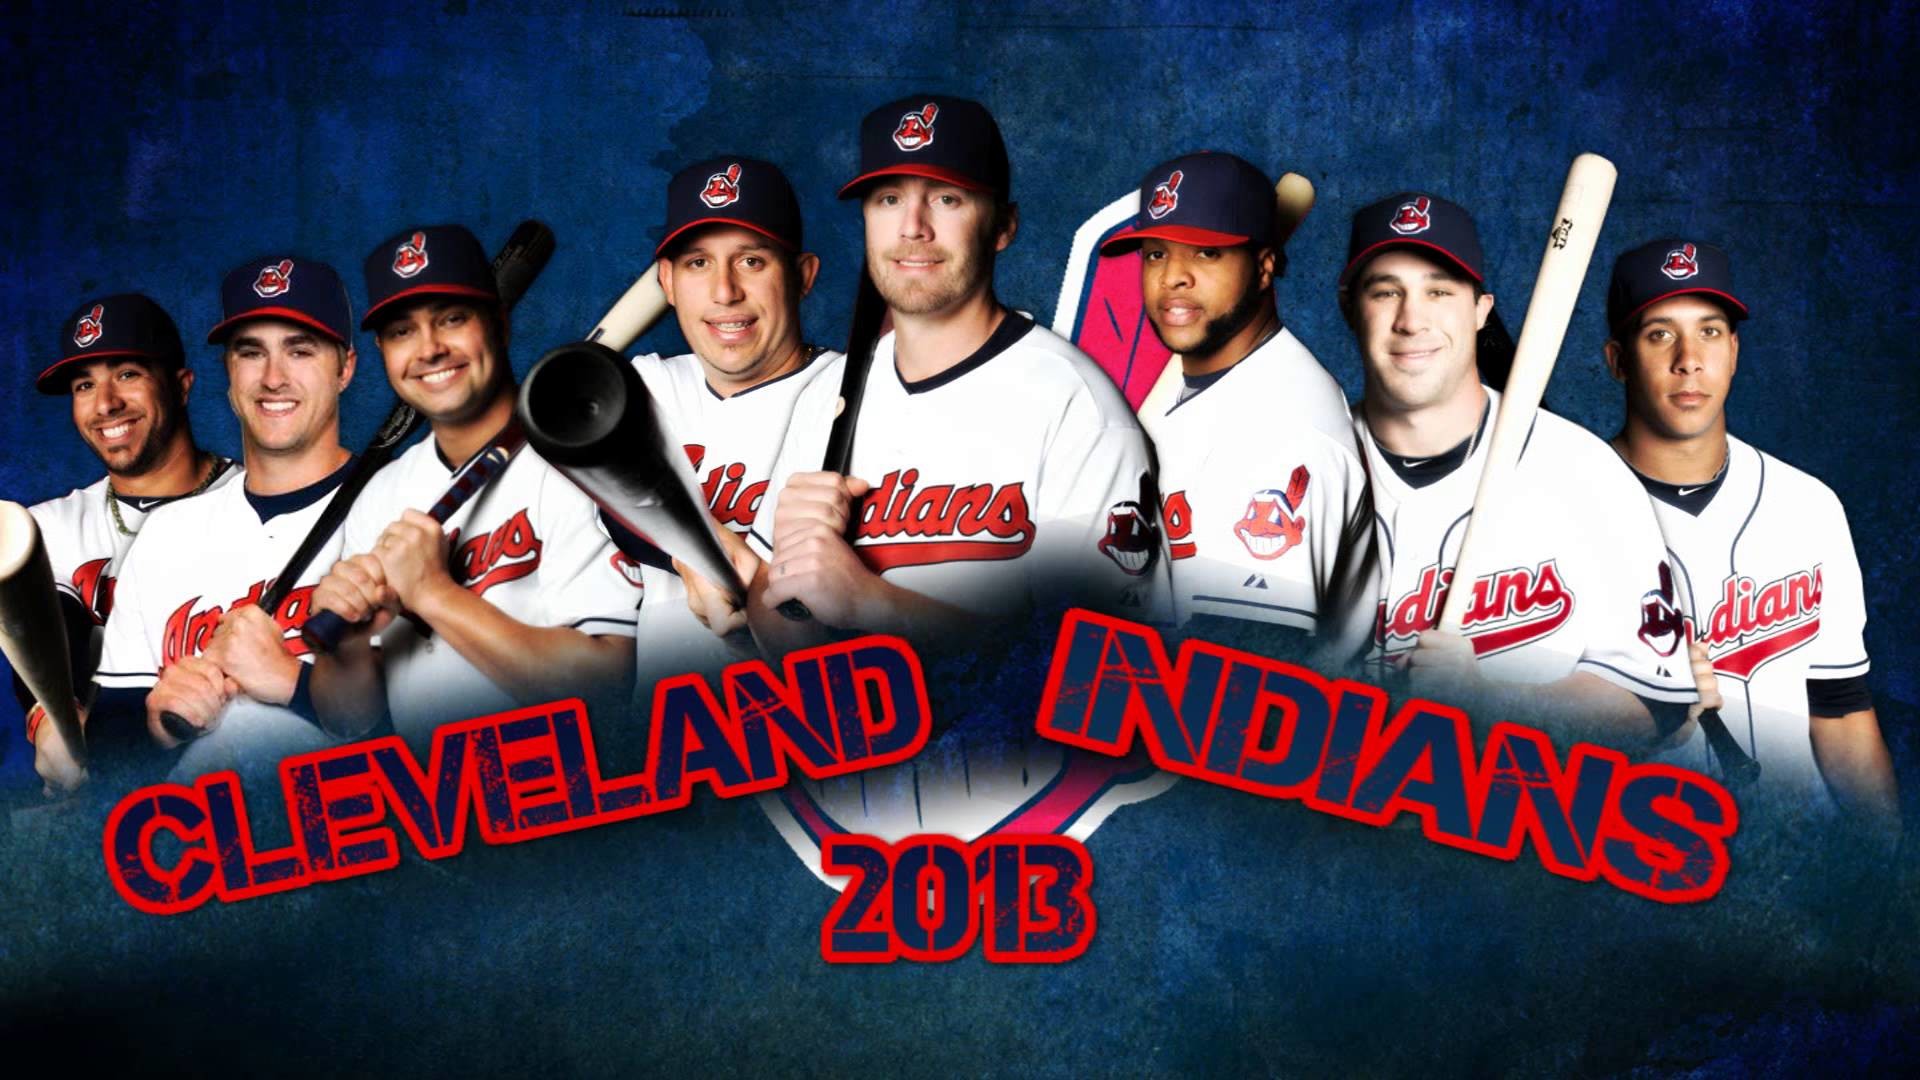 1920x1080 Cleveland Indians 2013 Custom Poster - YouTube